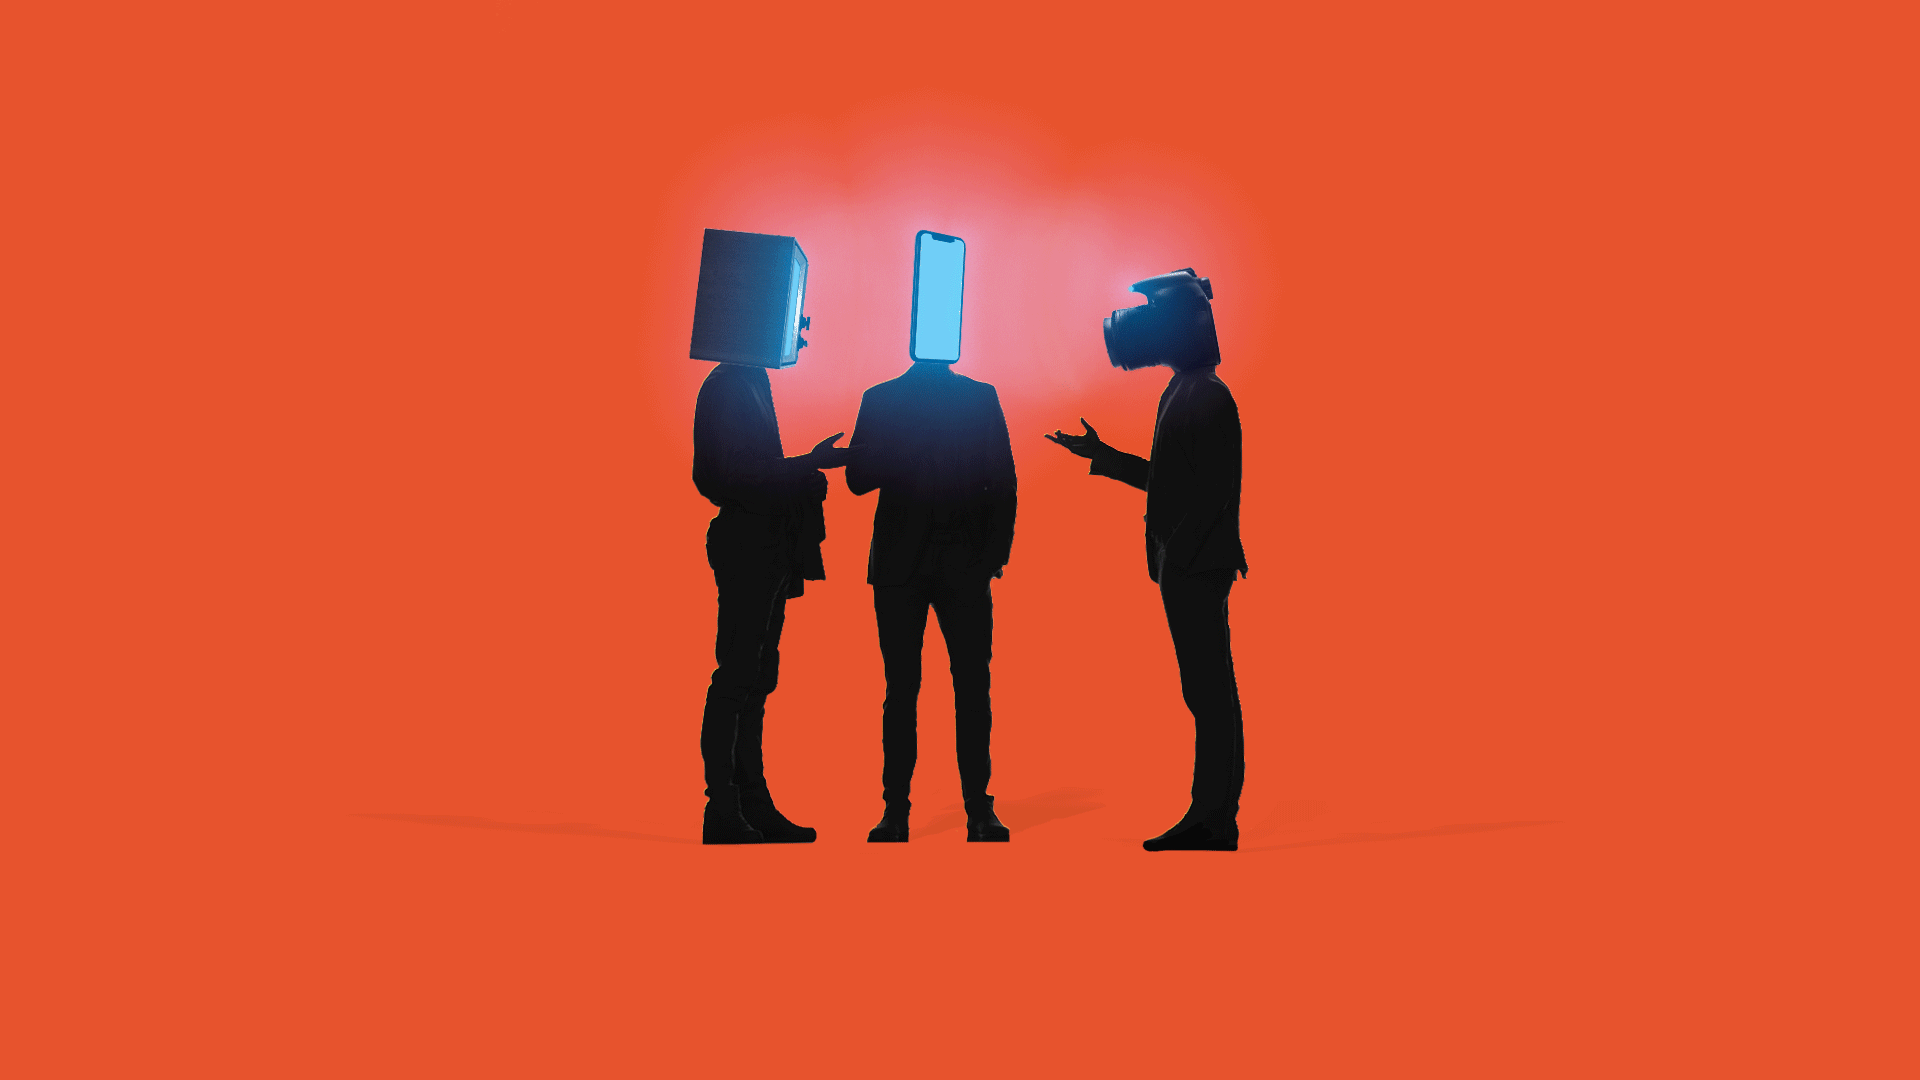 Illustration of three figures in silhouette with screens for heads